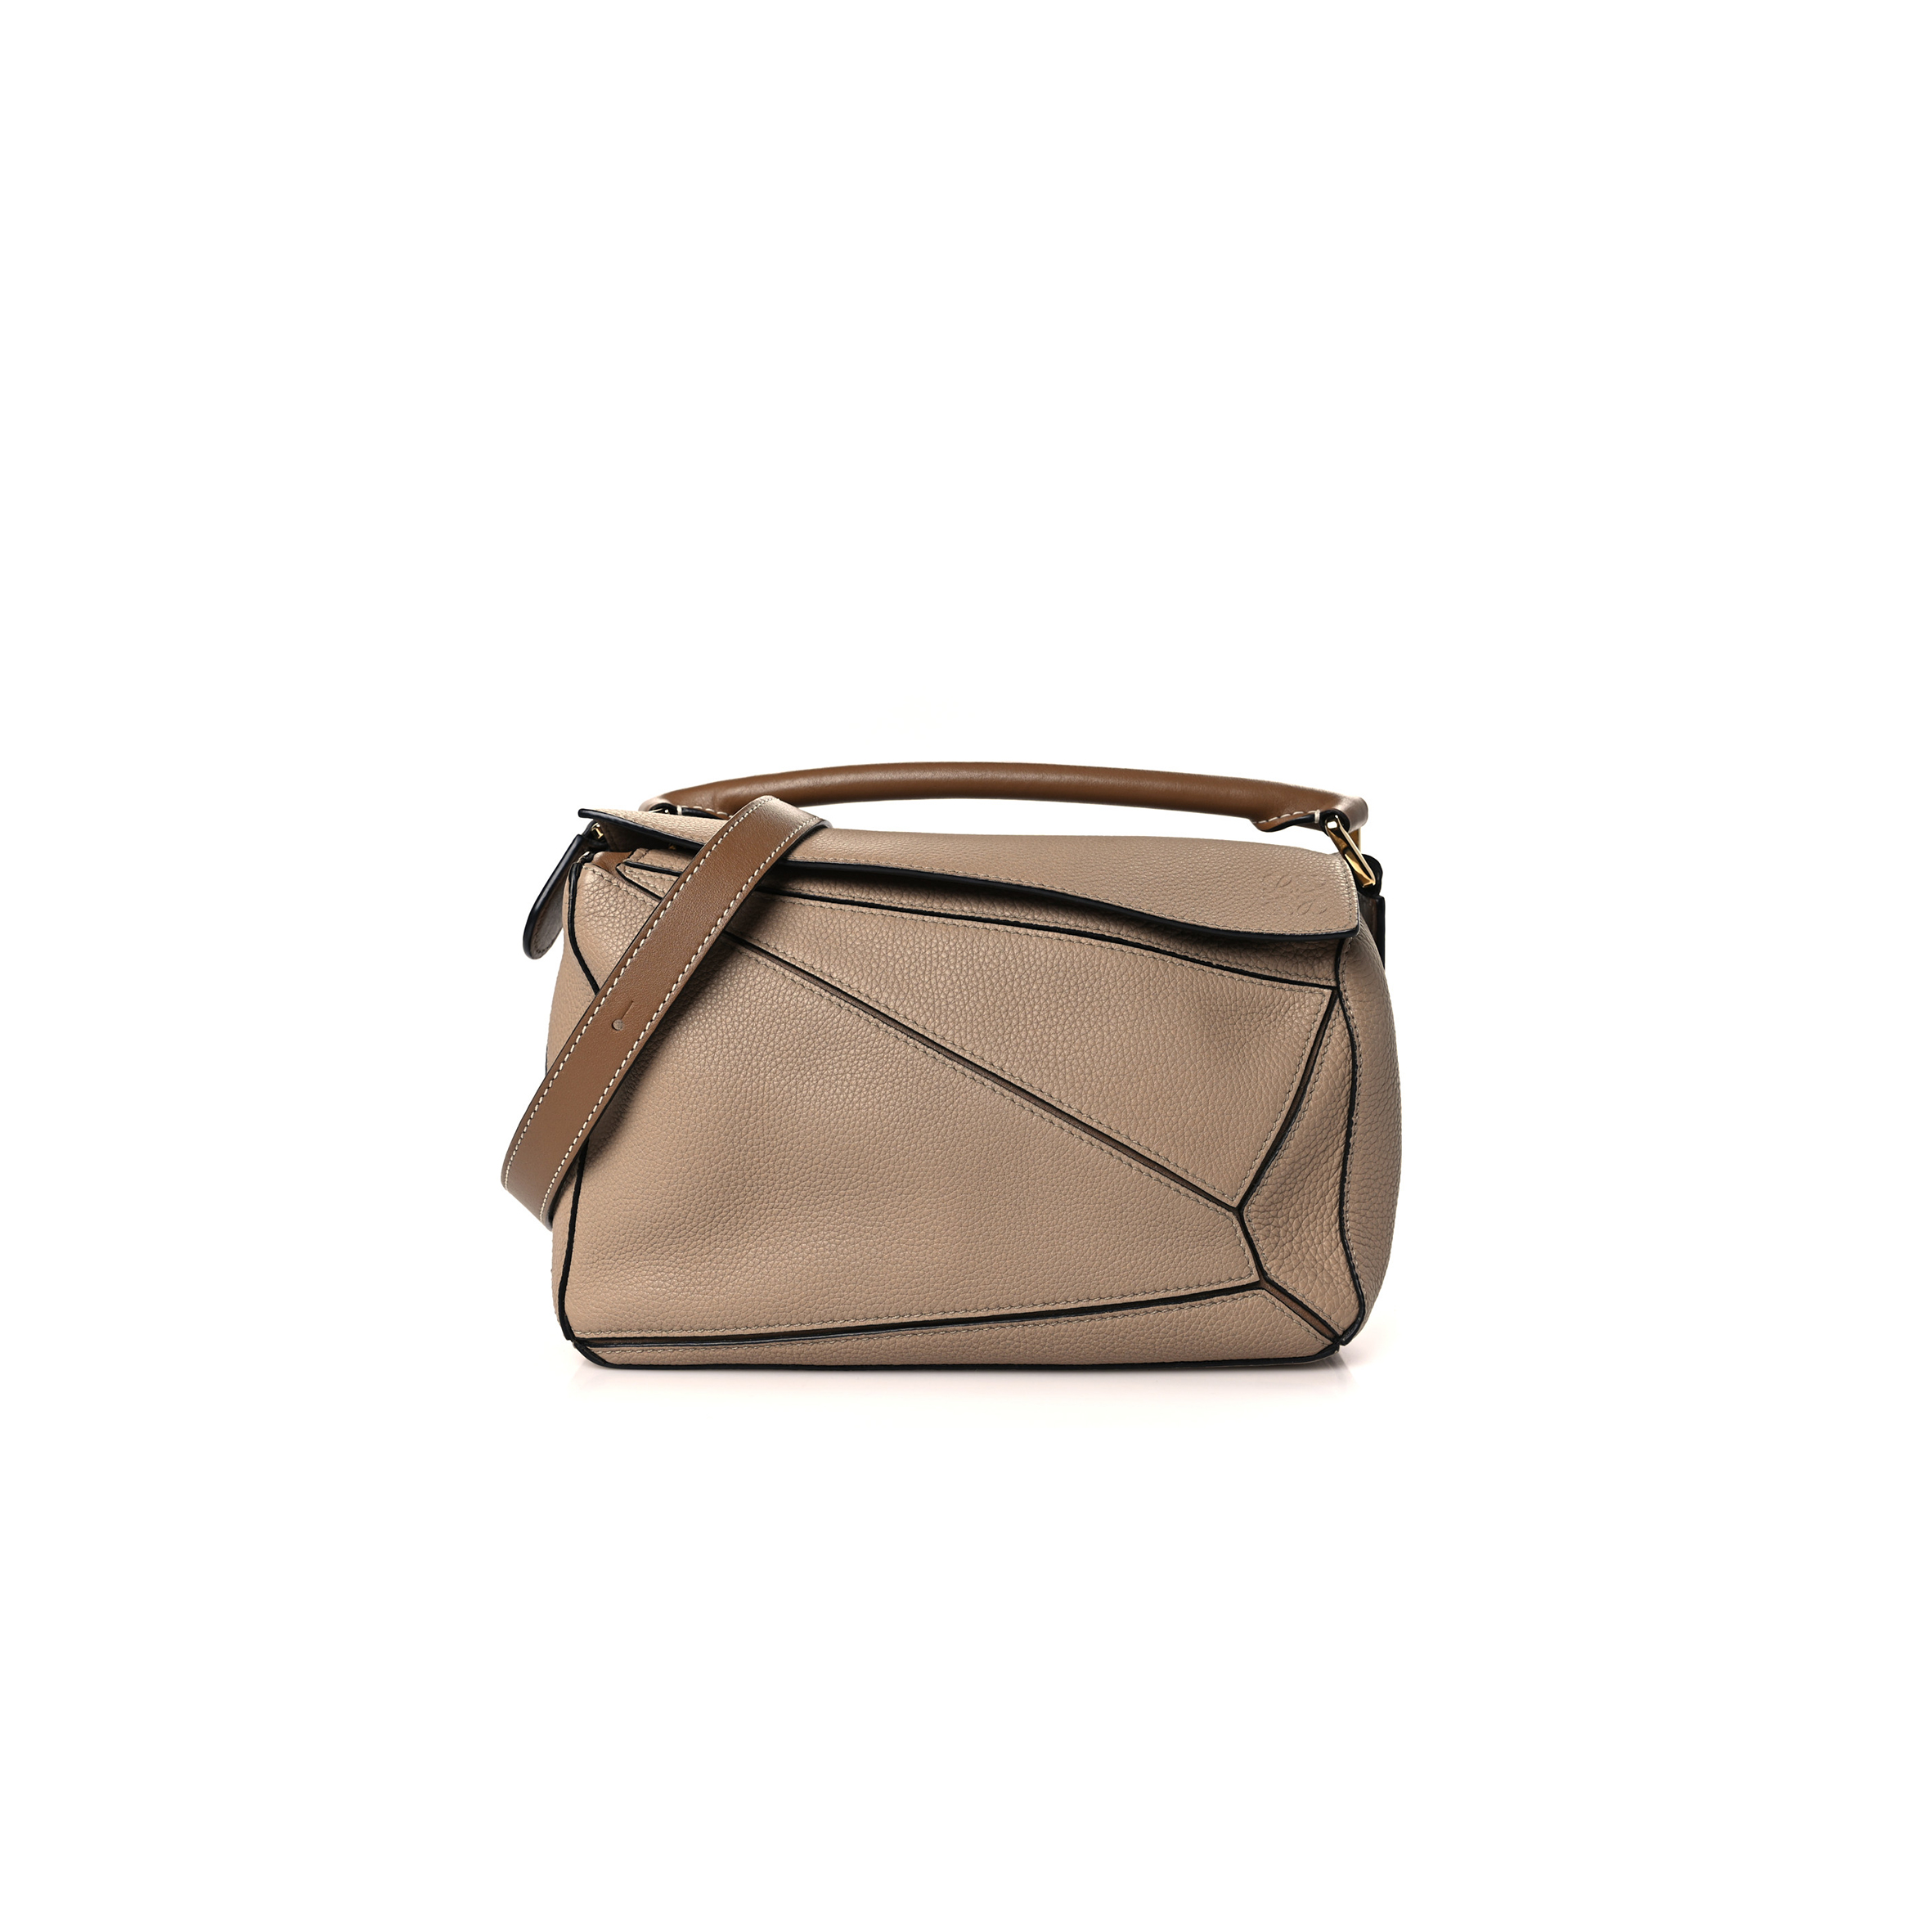 LOEWE GRAINED CALFSKIN SMALL PUZZLE BAG SAND MINK (24*15*10cm)